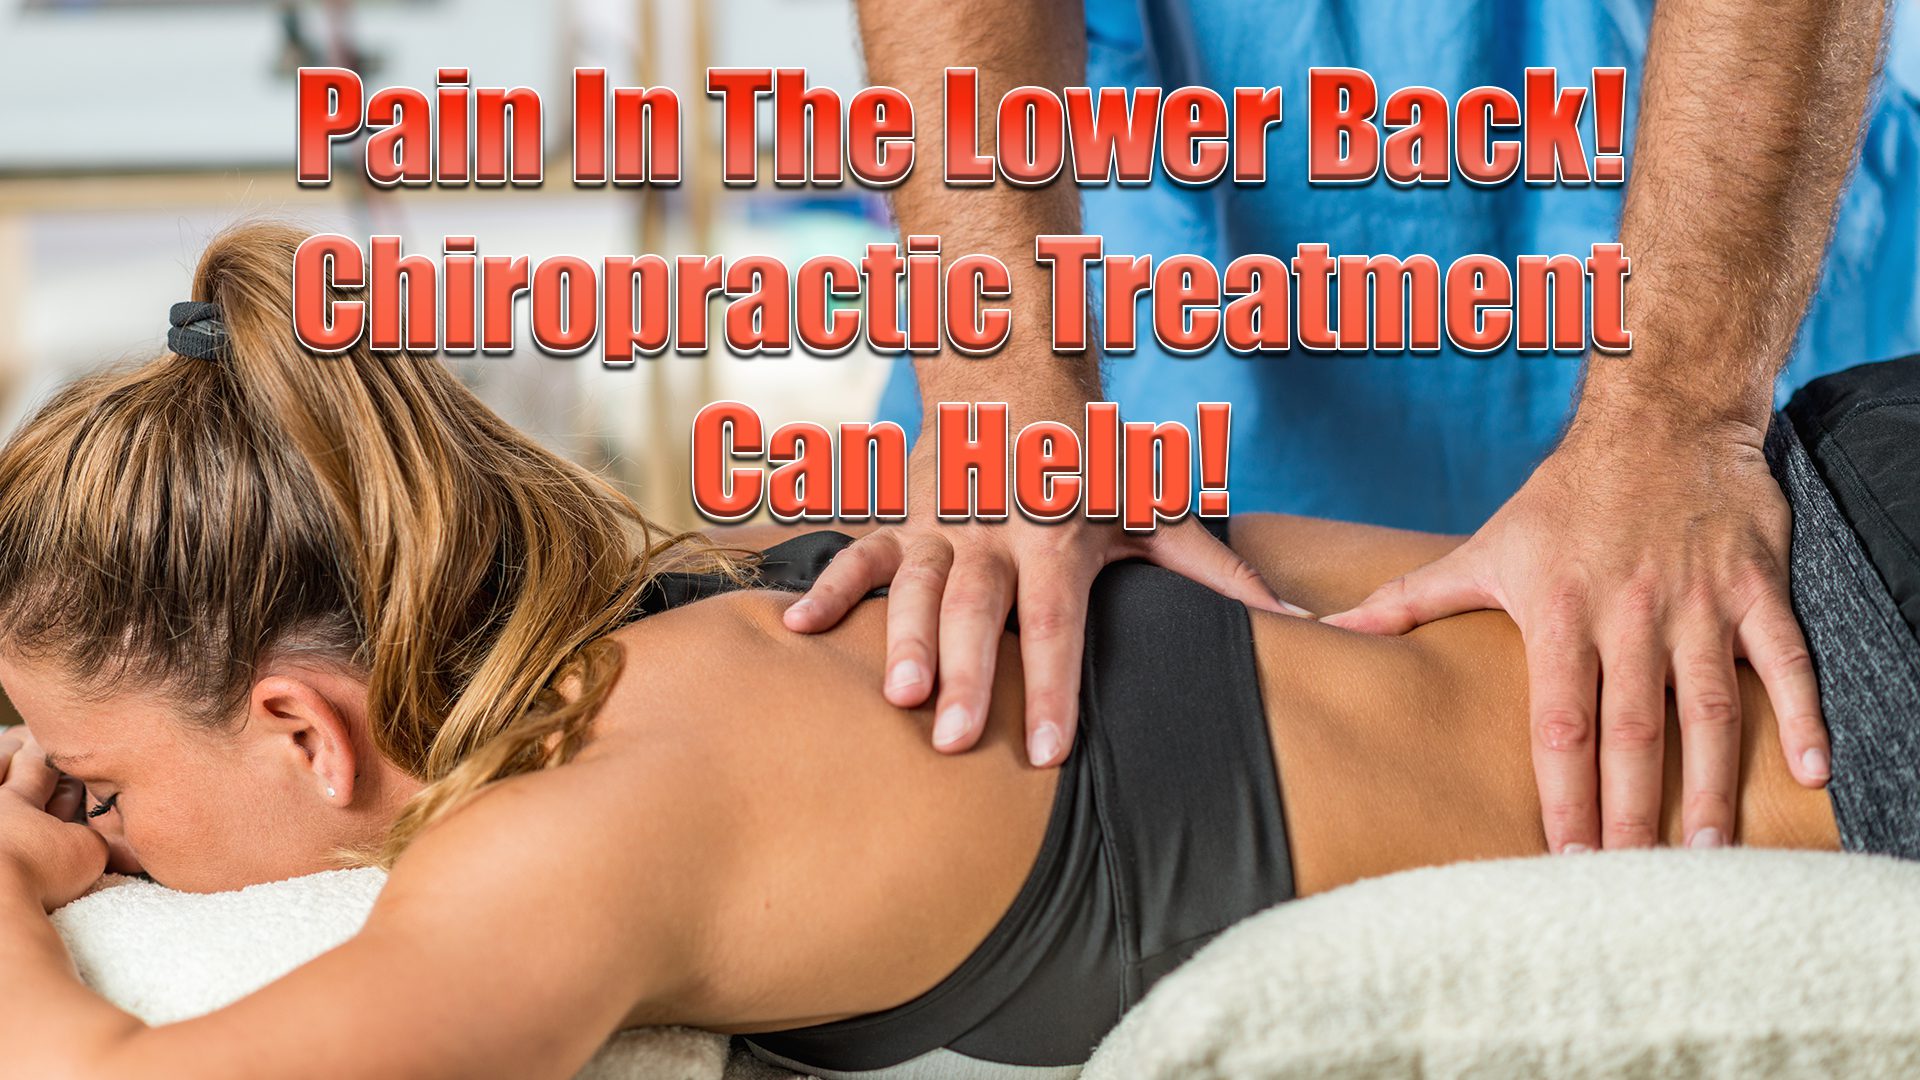 Chiropractic Treatment Can Help! 